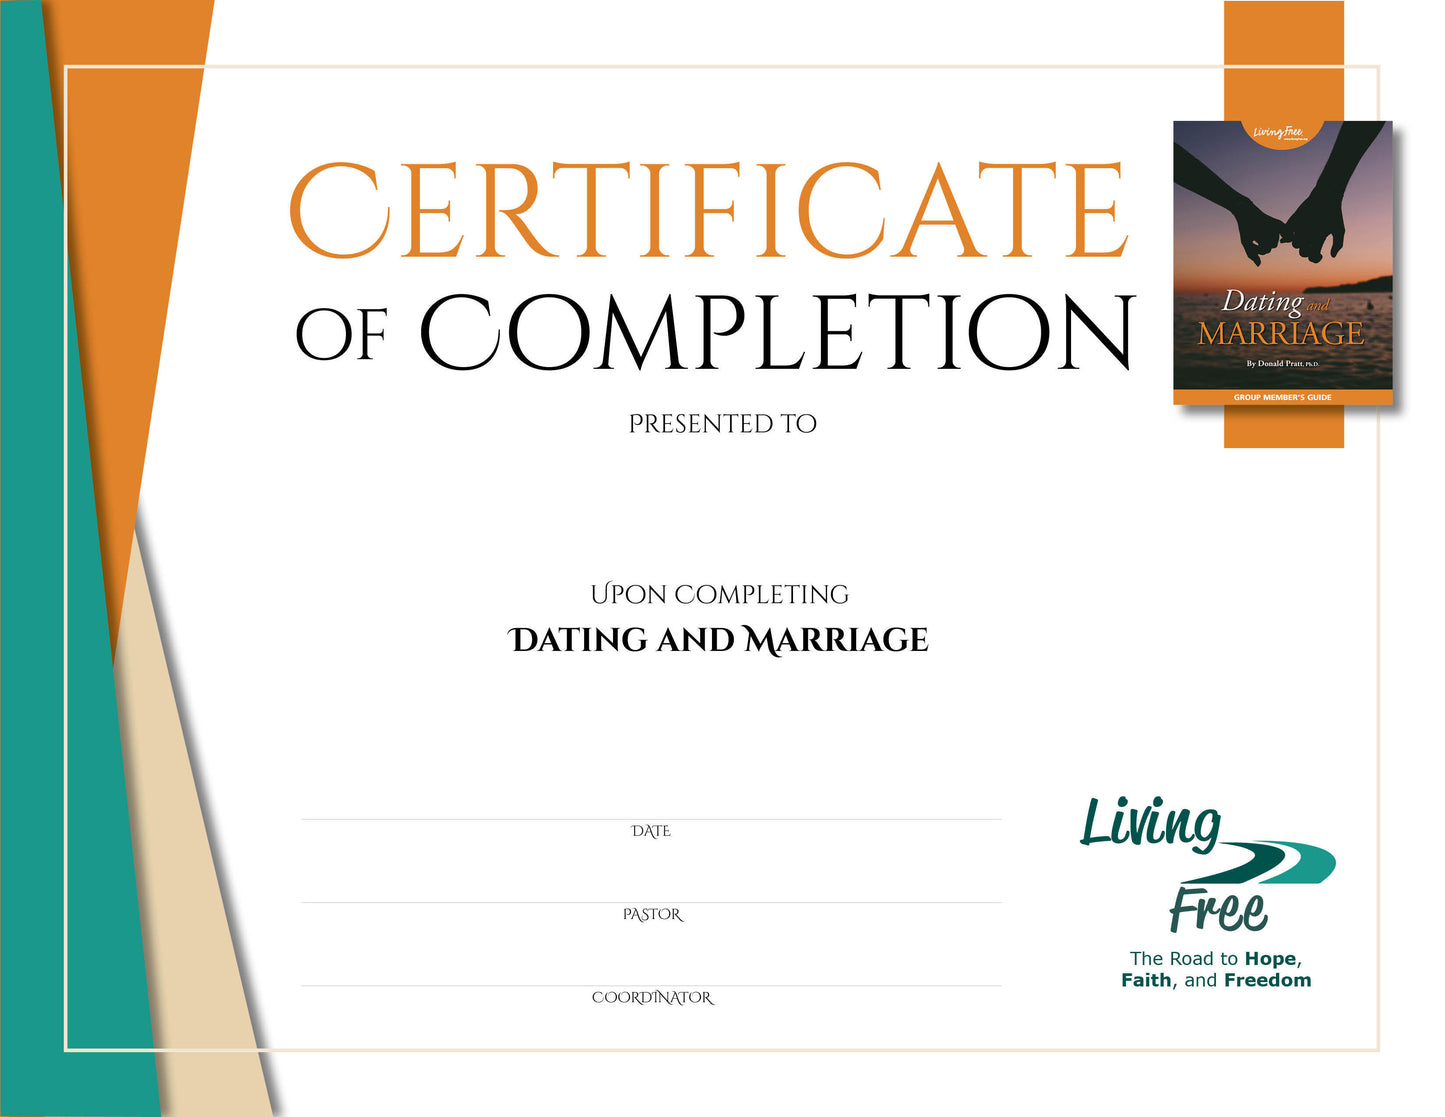 Dating and Marriage Digital Certificate